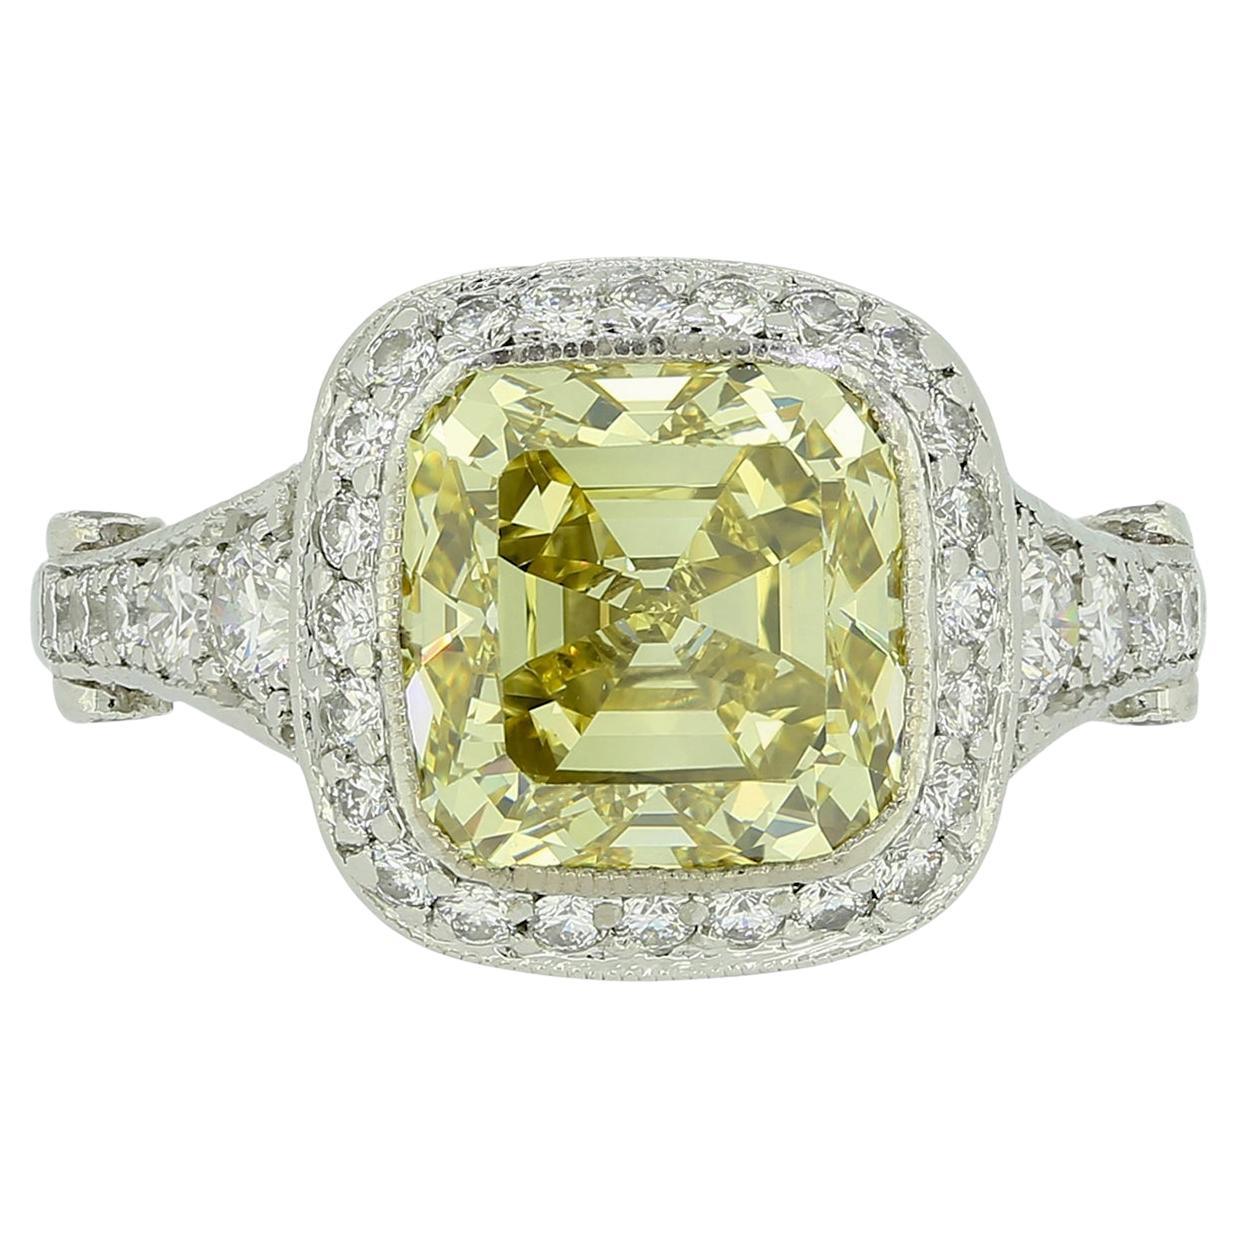 Tiffany & Co. Legacy 4.00 Carat Fancy Intense Yellow Diamond Engagement Ring For Sale